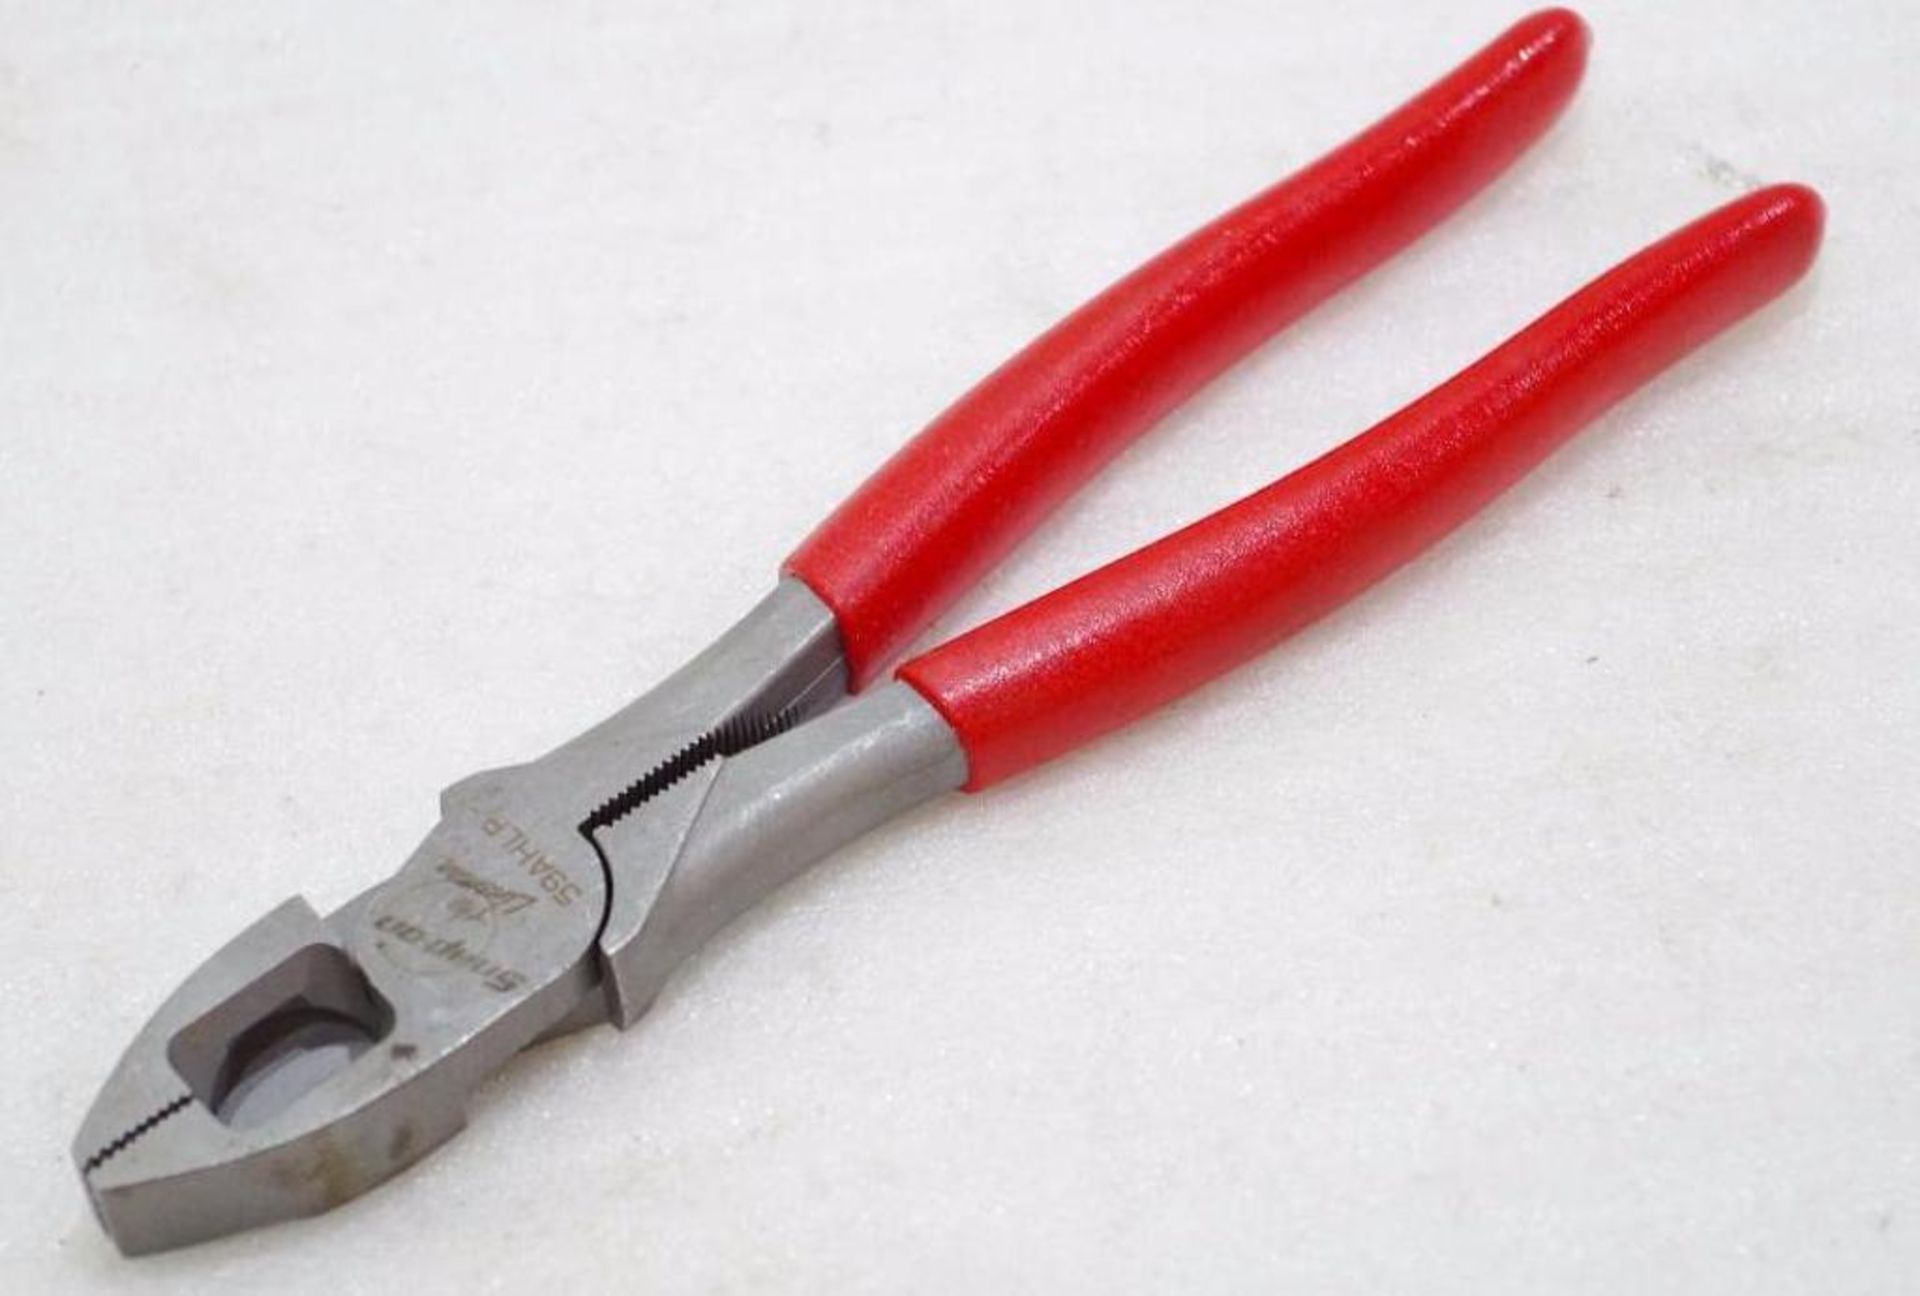 NEW SNAP-ON Lineman's Pliers, M/N 59AHLP, Made in USA